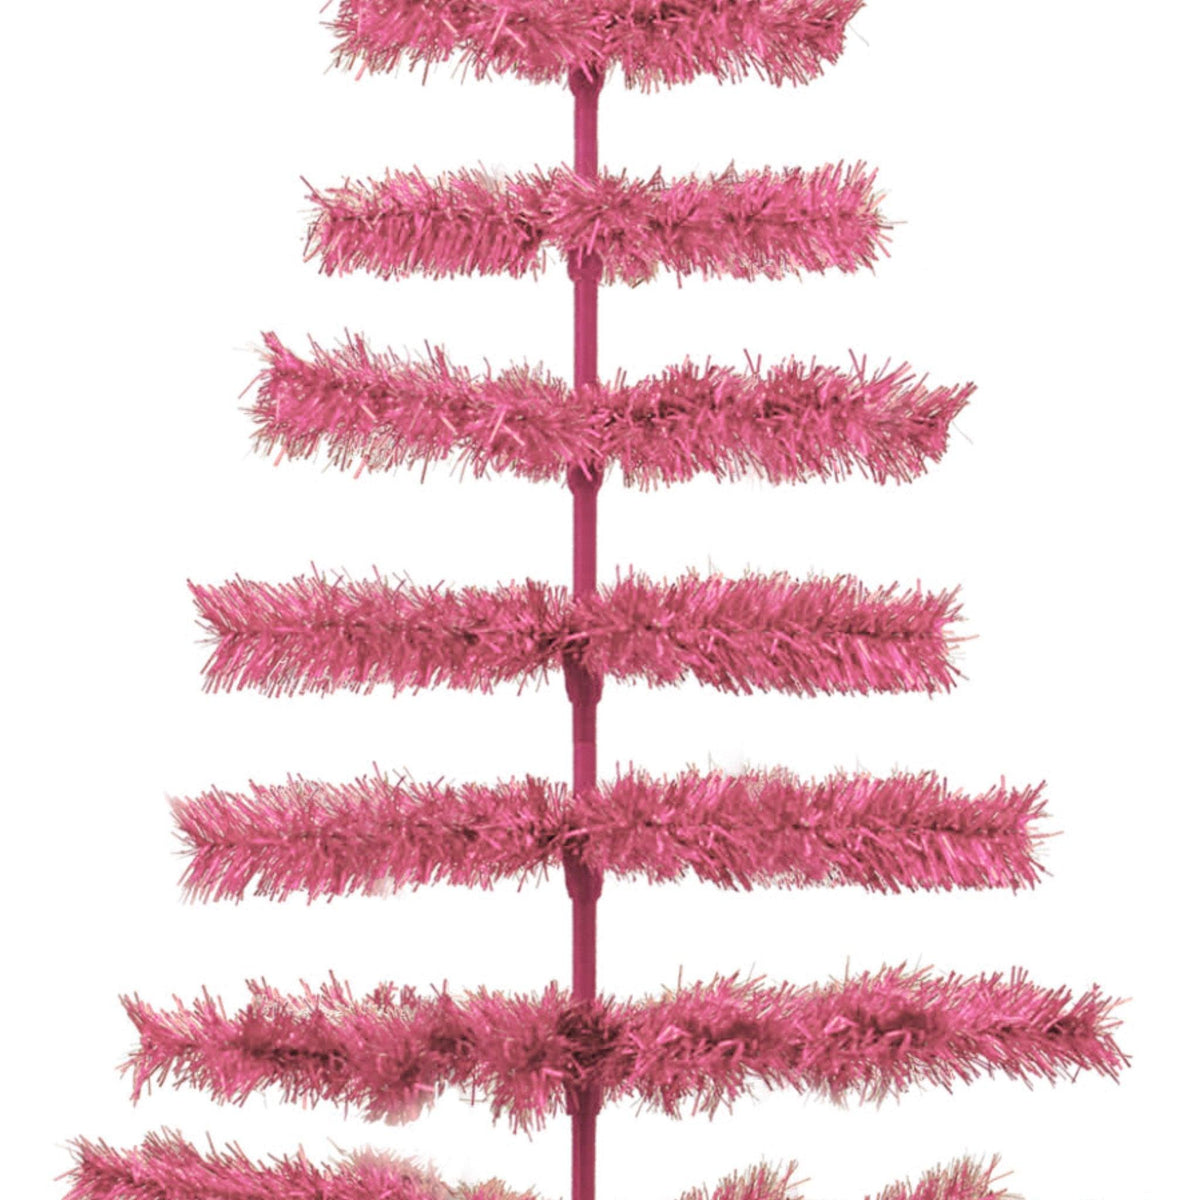 Middle section of the 5ft tall pink christmas tree. Each tree has a bunch of tips to hang your favorite holiday ornaments from.